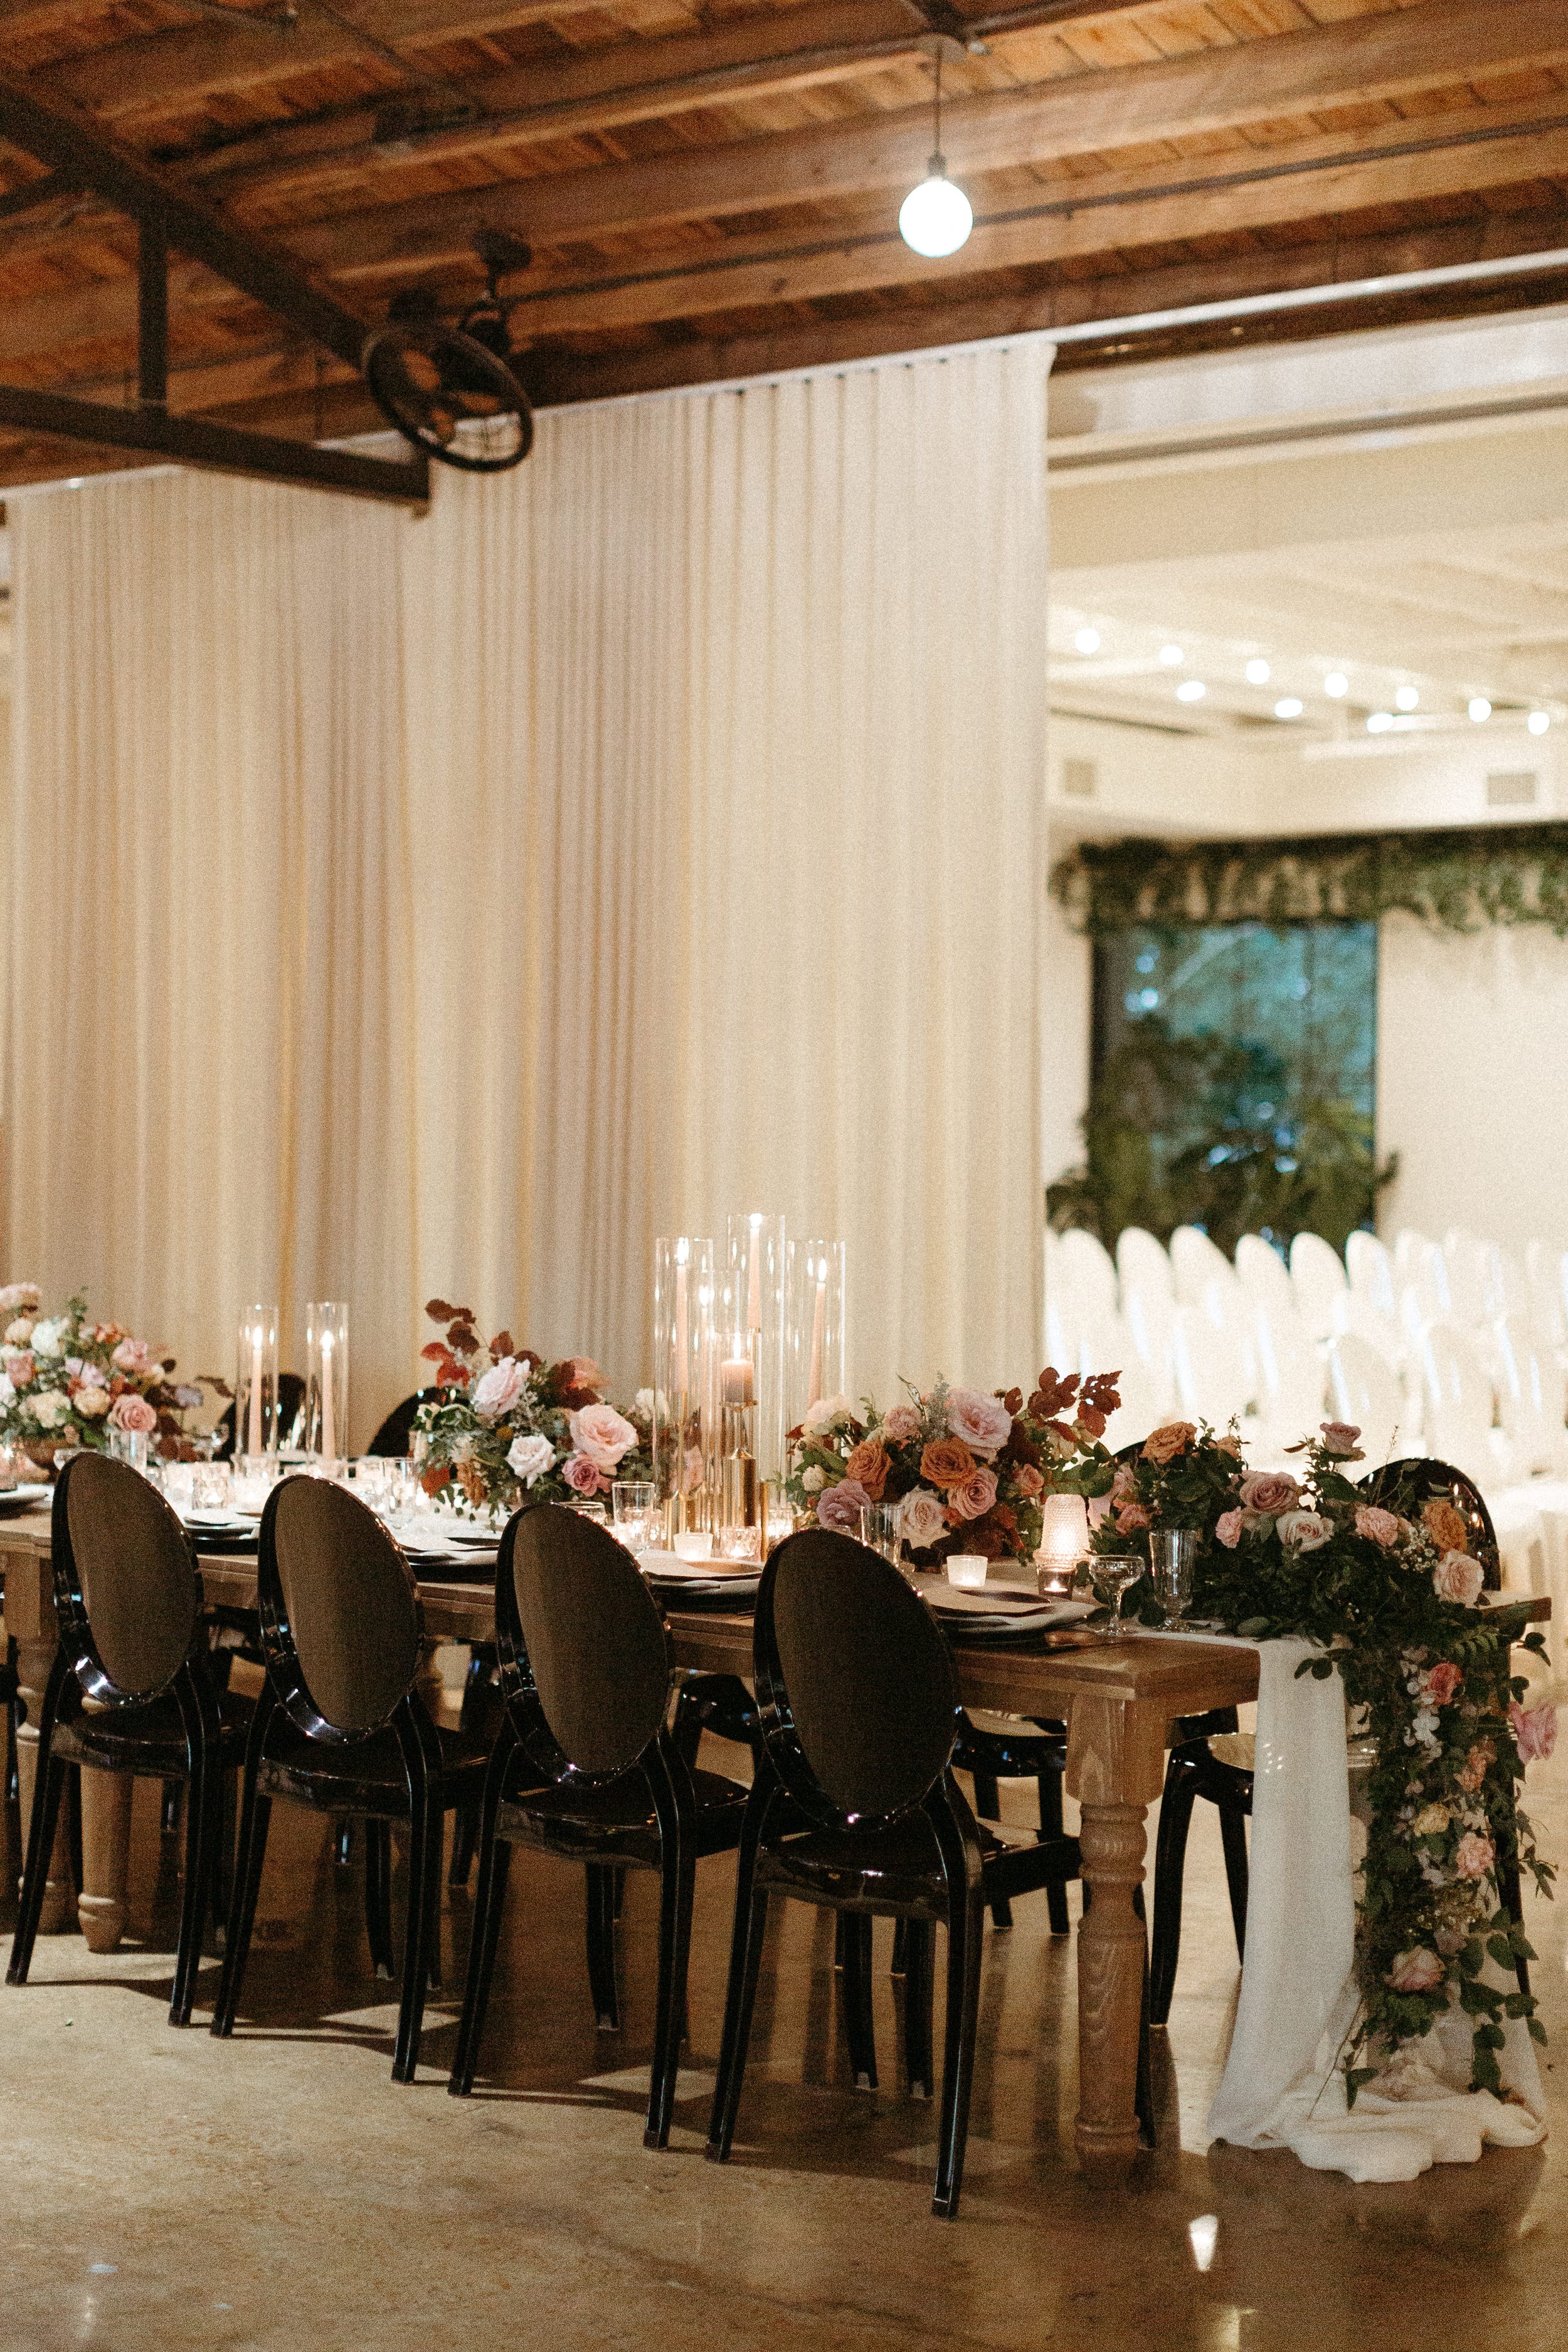 Gorgeous centerpieces bring warmth to this art deco 1920s inspired wedding with hues of terra cotta, dusty pink, mauve, and burgundy. Lush roses, ranunculus, and copper beech highlight the florals. Designed by Rosemary and Finch in Nashville, TN.